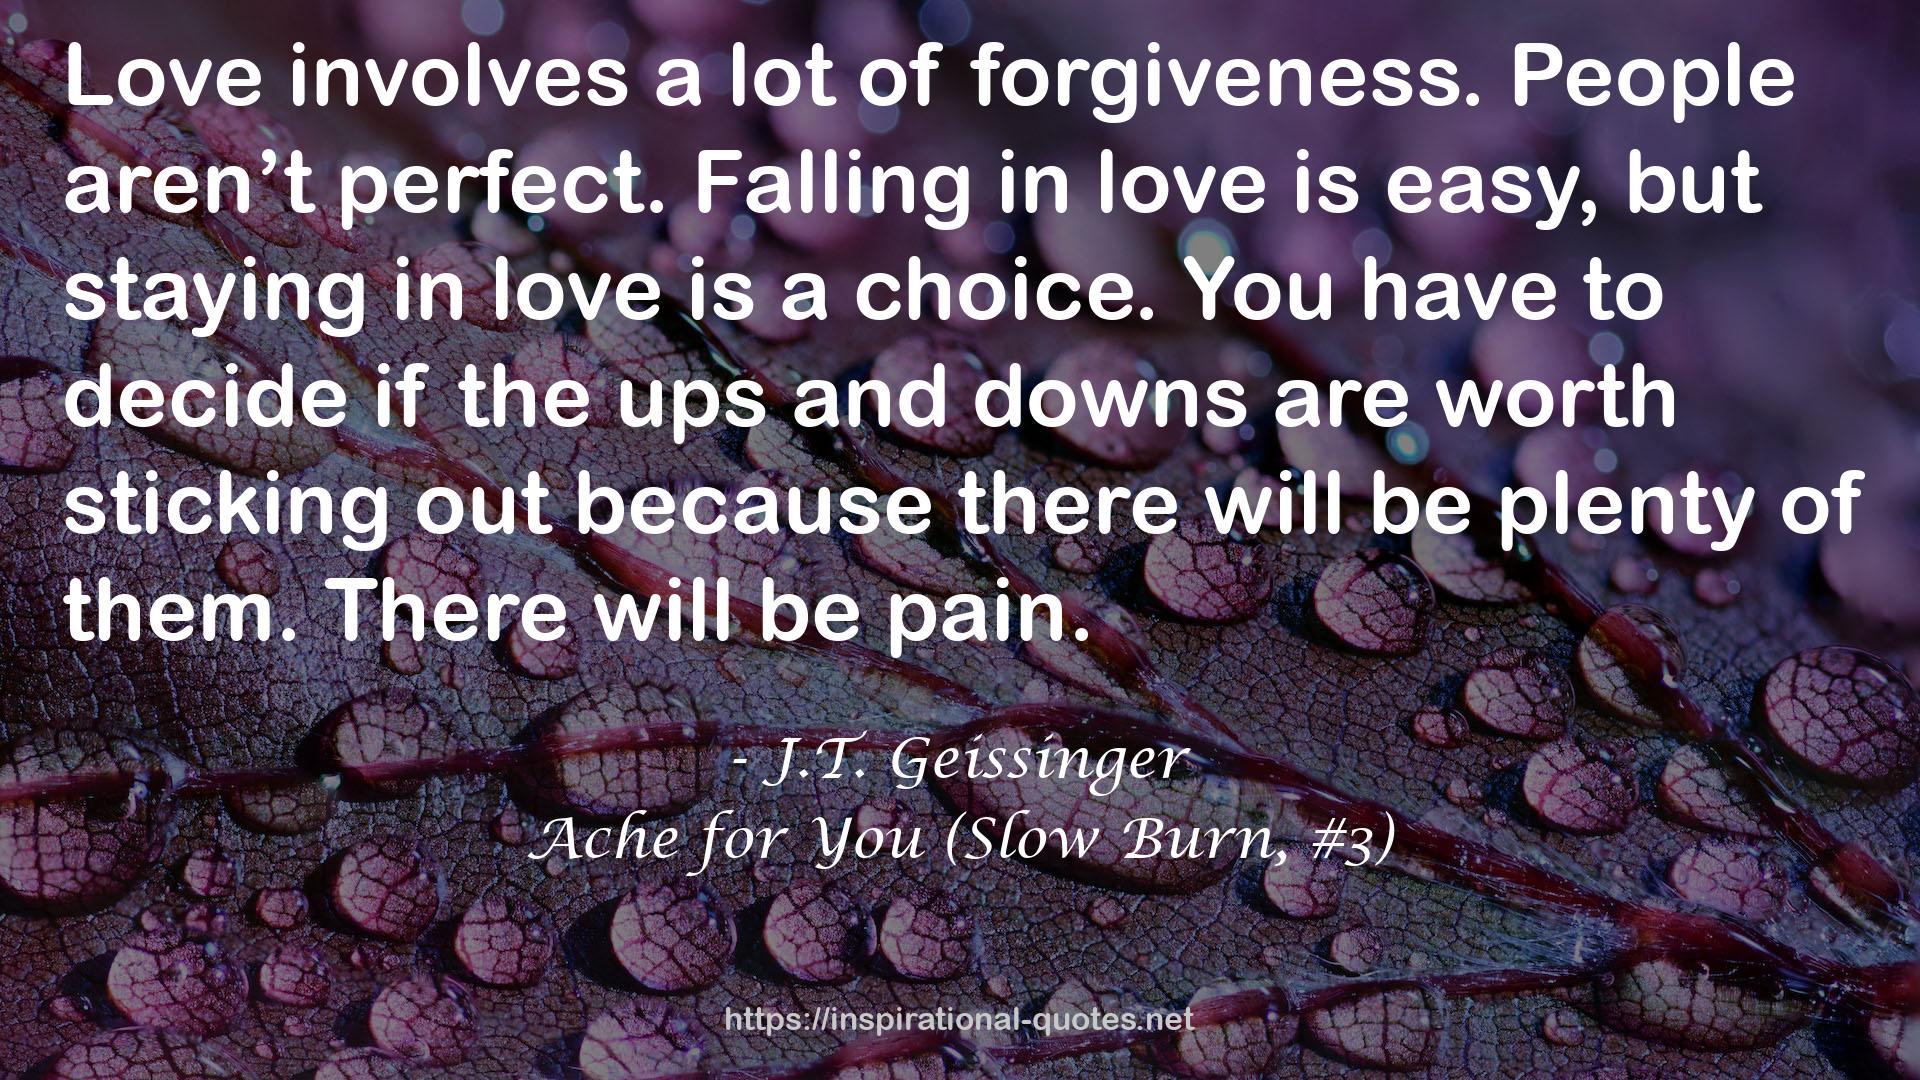 Ache for You (Slow Burn, #3) QUOTES